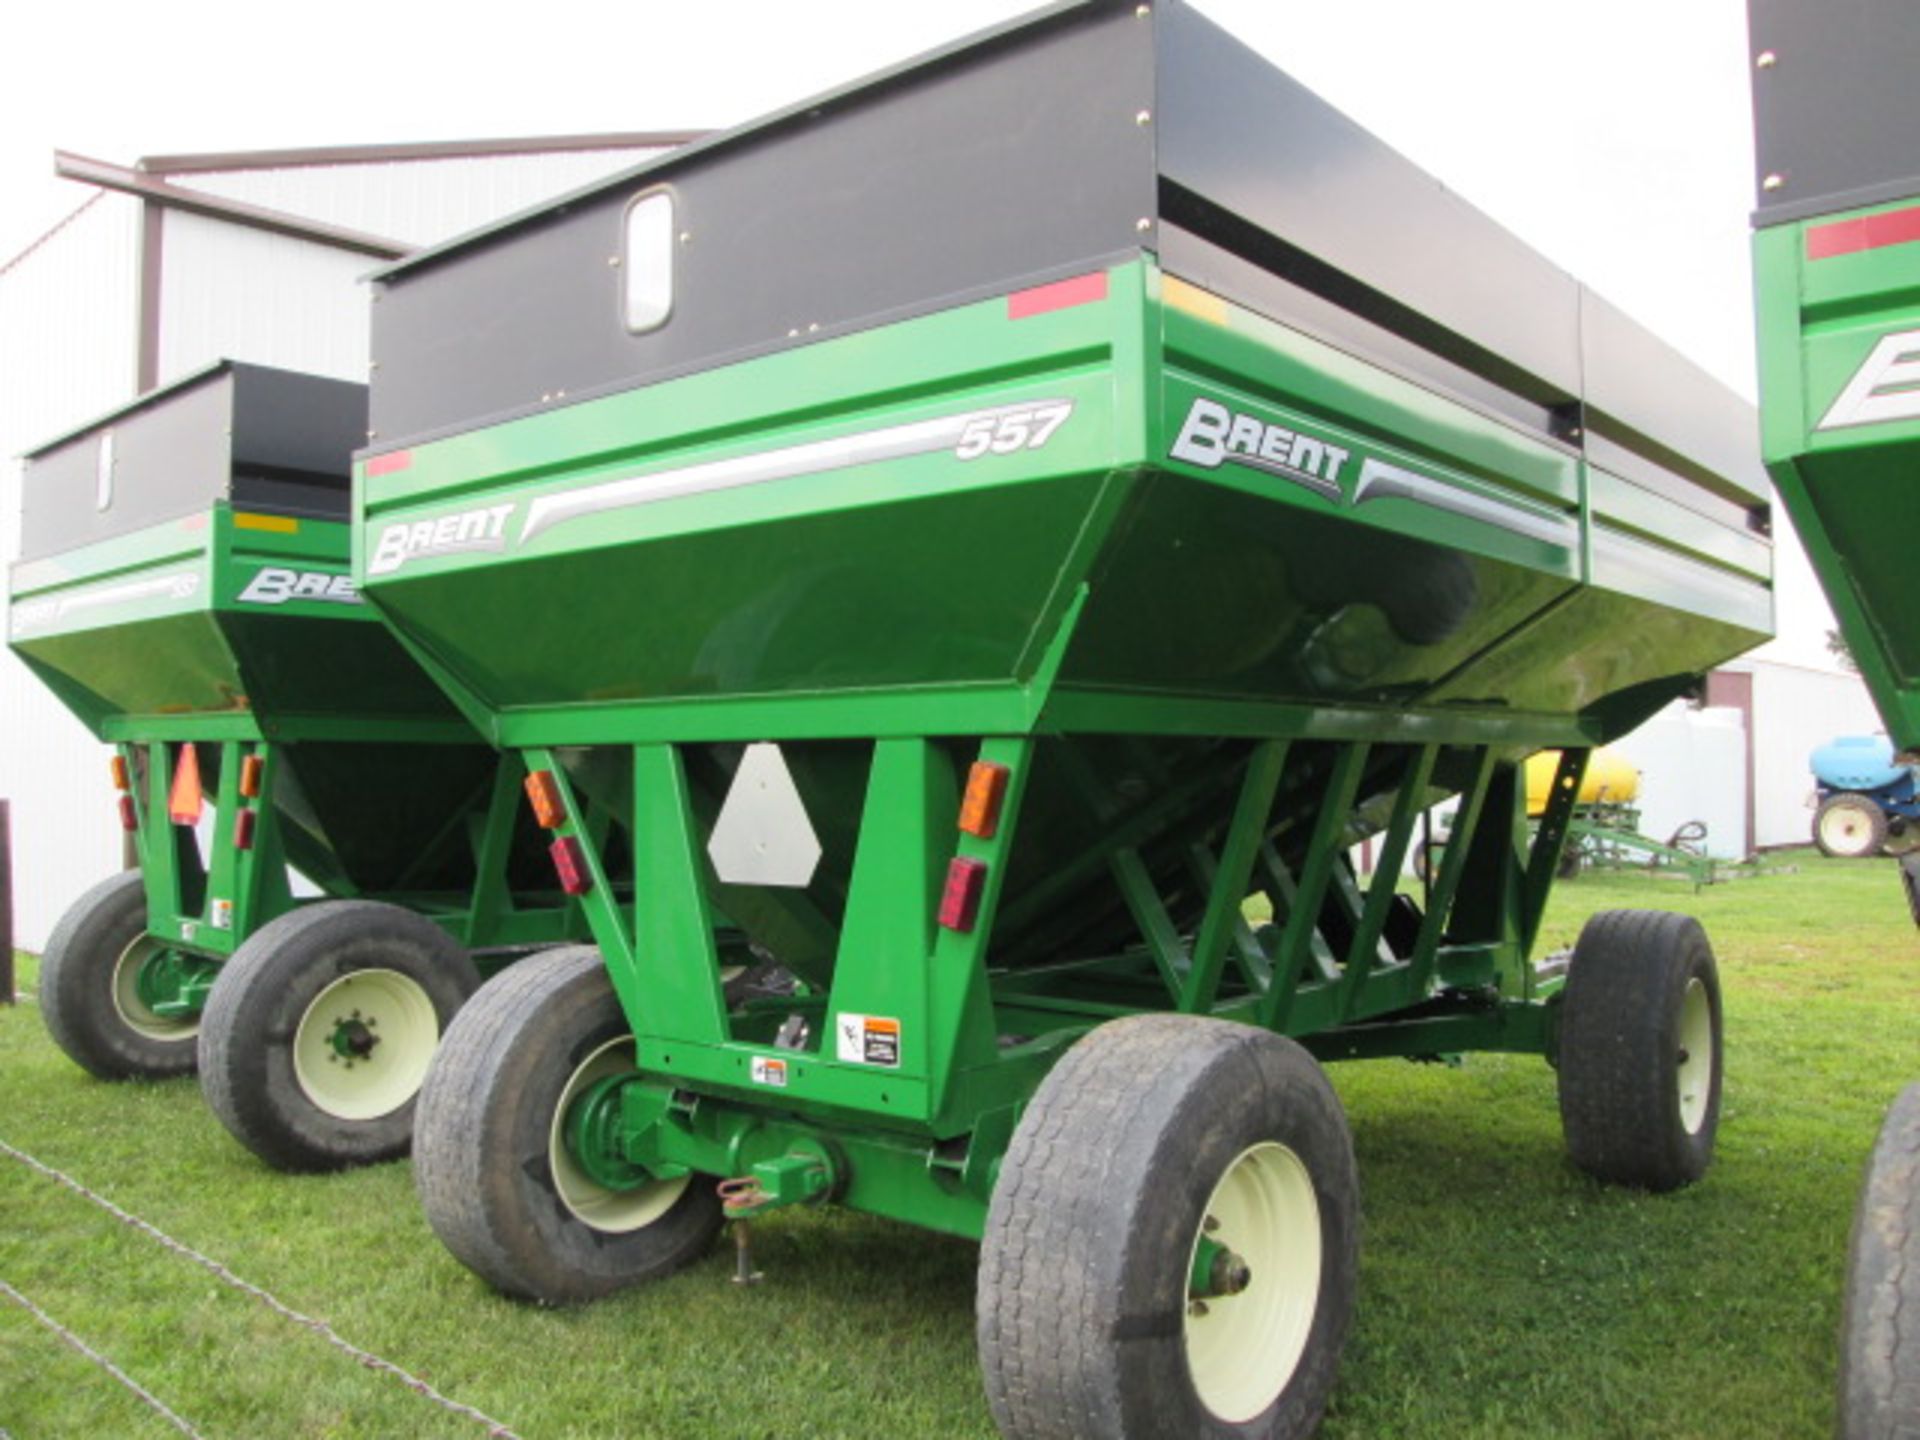 BRENT 557 GRAVITY FLOW WAGON - Image 3 of 11